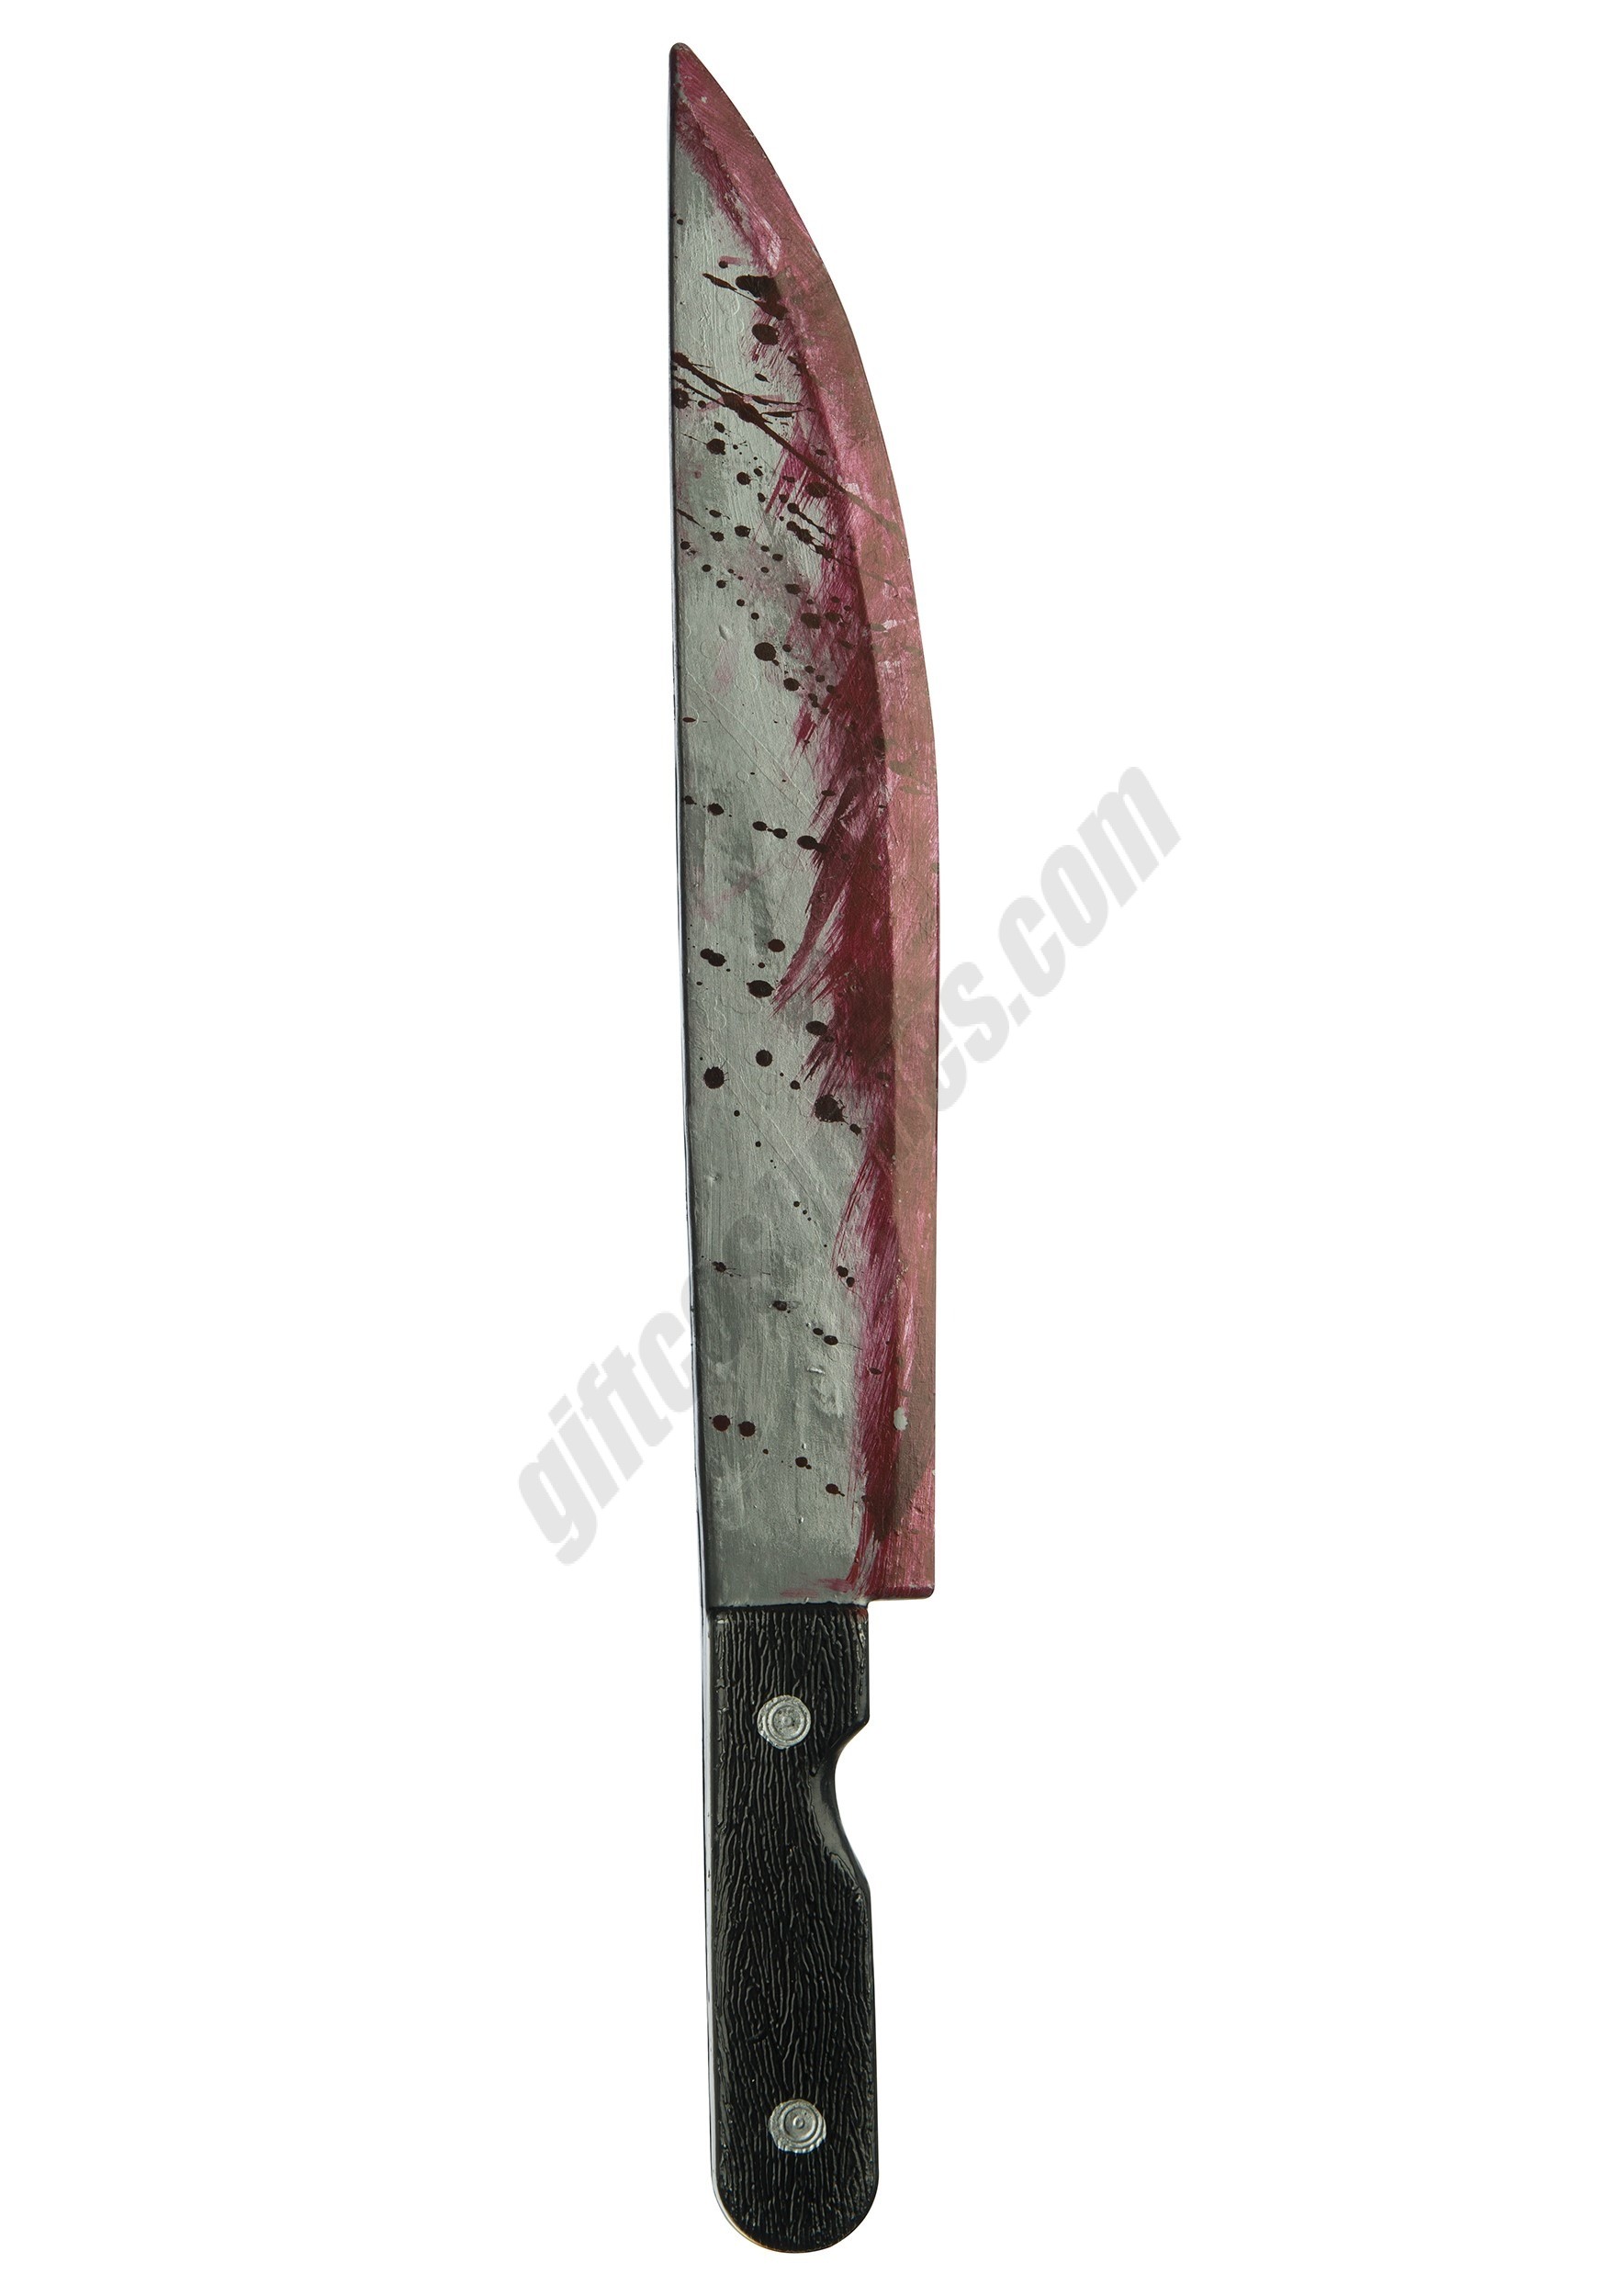 Halloween Michael Myers Knife with Sound Promotions - Halloween Michael Myers Knife with Sound Promotions